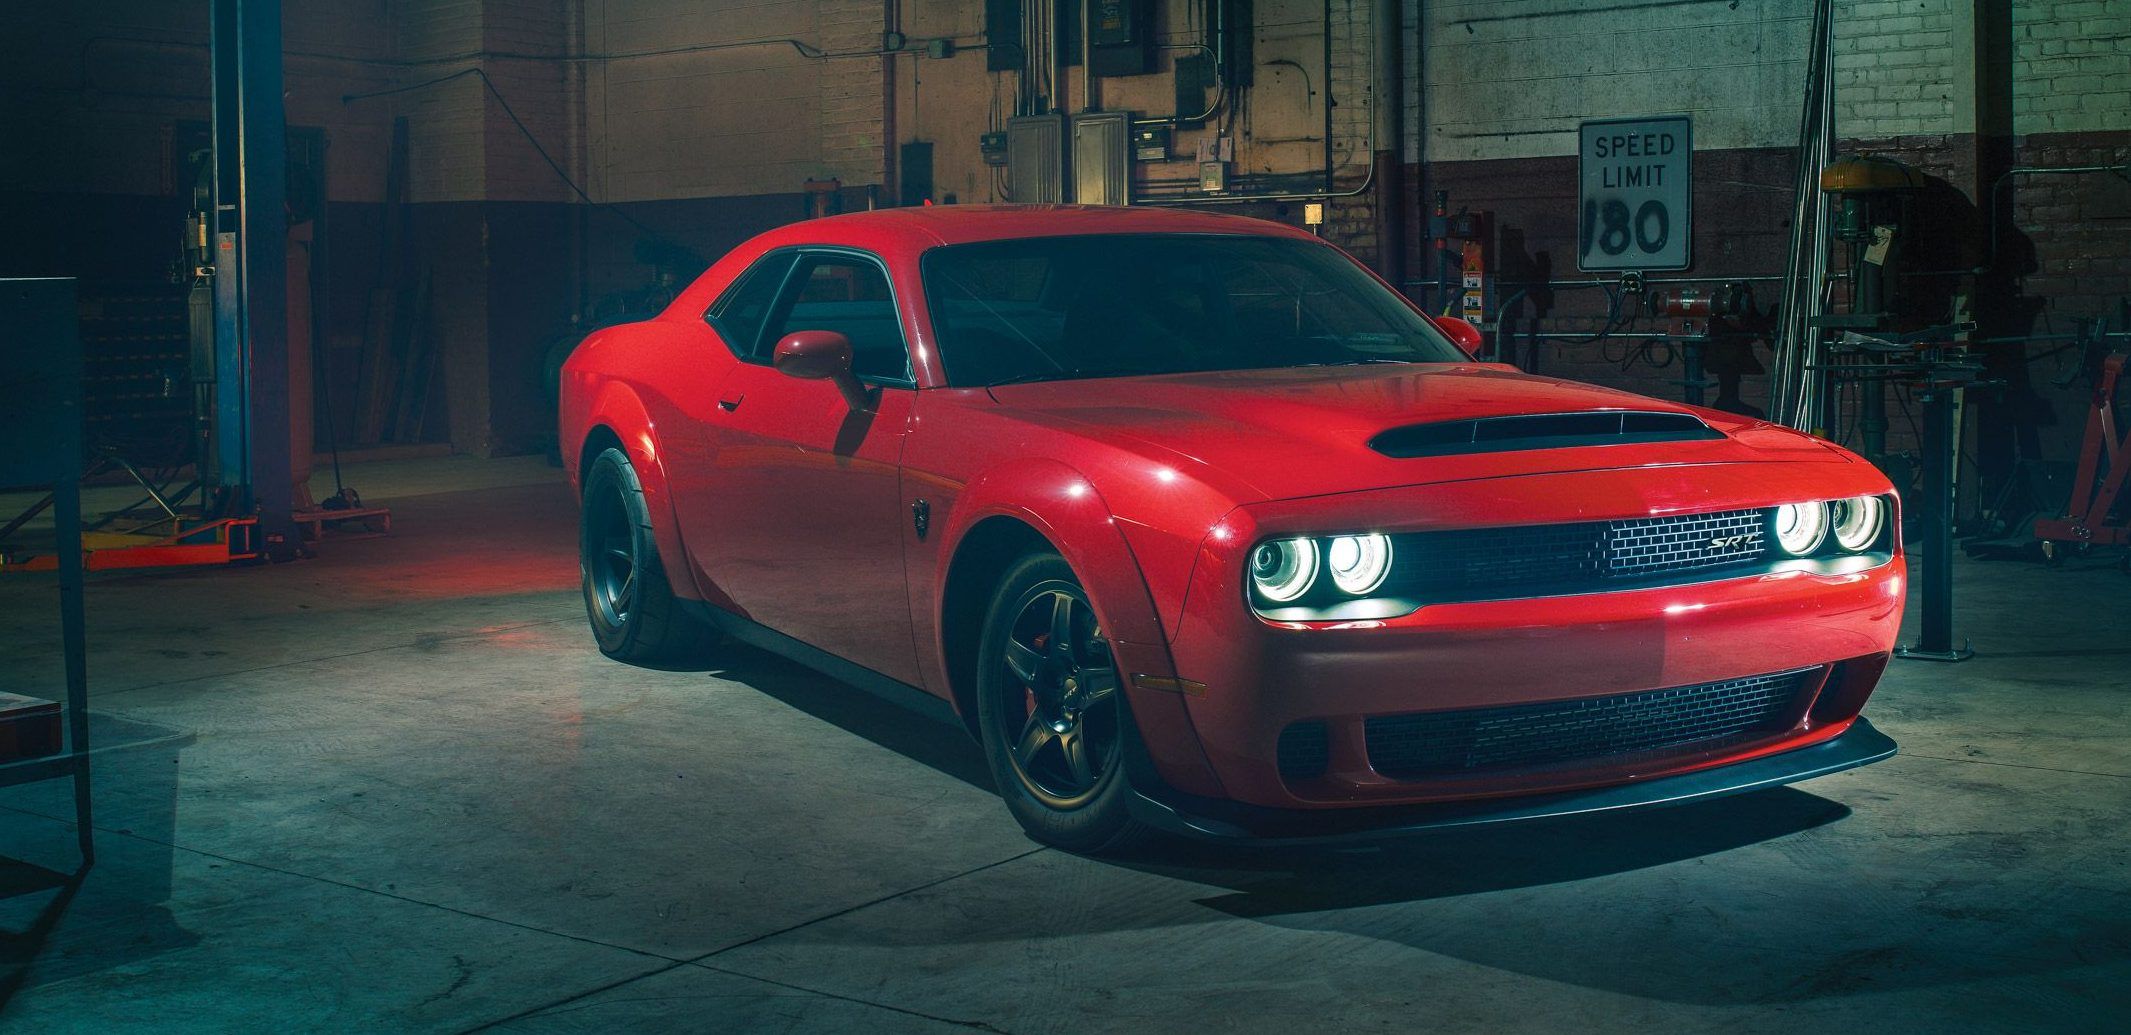 The 100,000 Dodge Demon What You Need To Know About This Legendary